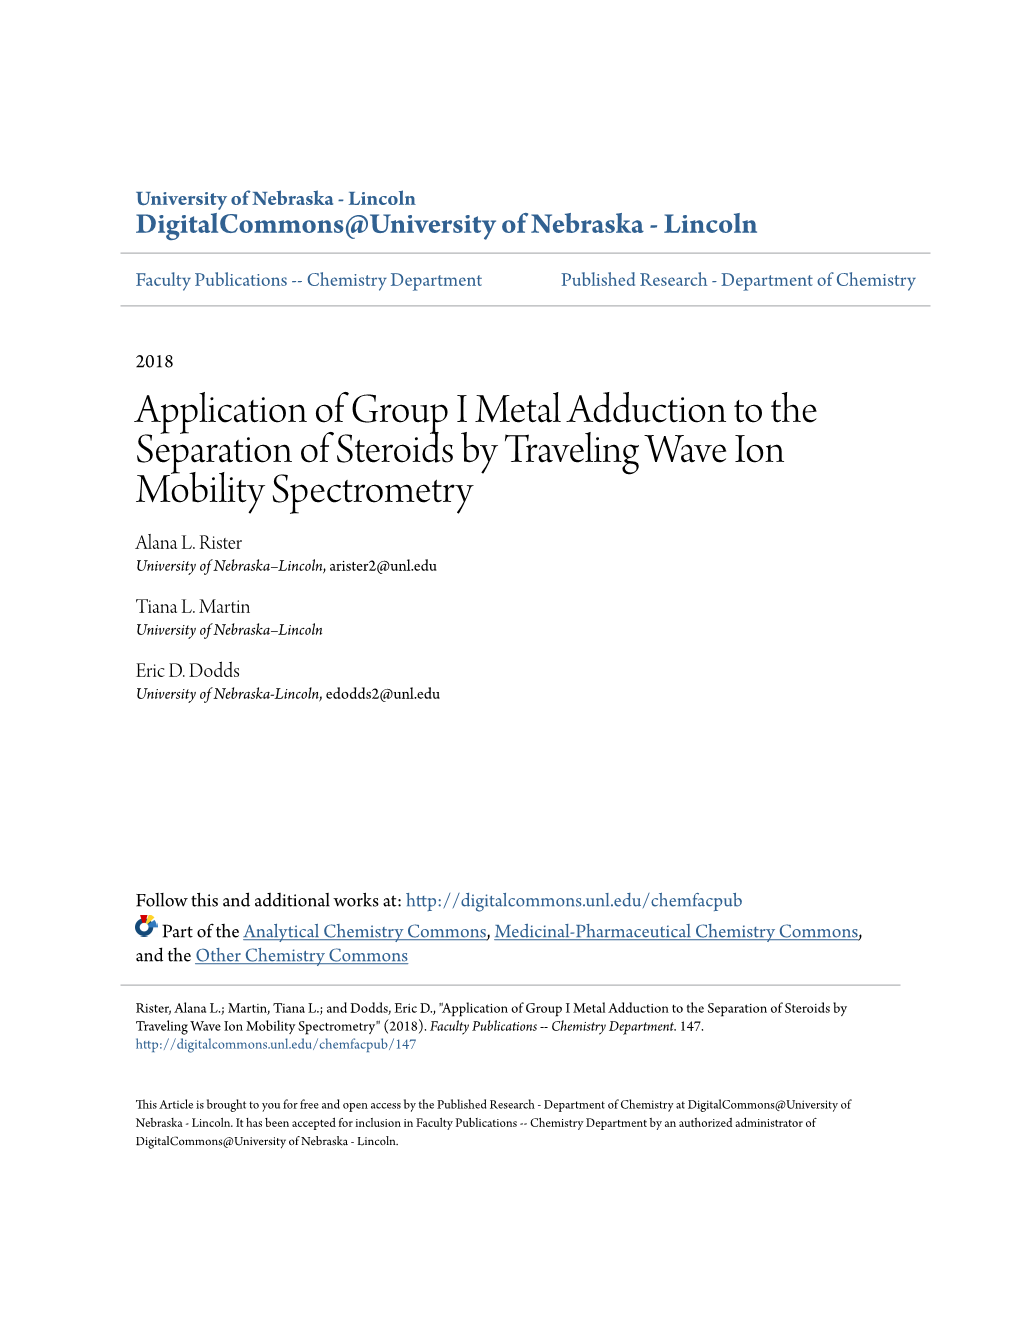 Application of Group I Metal Adduction to the Separation of Steroids by Traveling Wave Ion Mobility Spectrometry Alana L